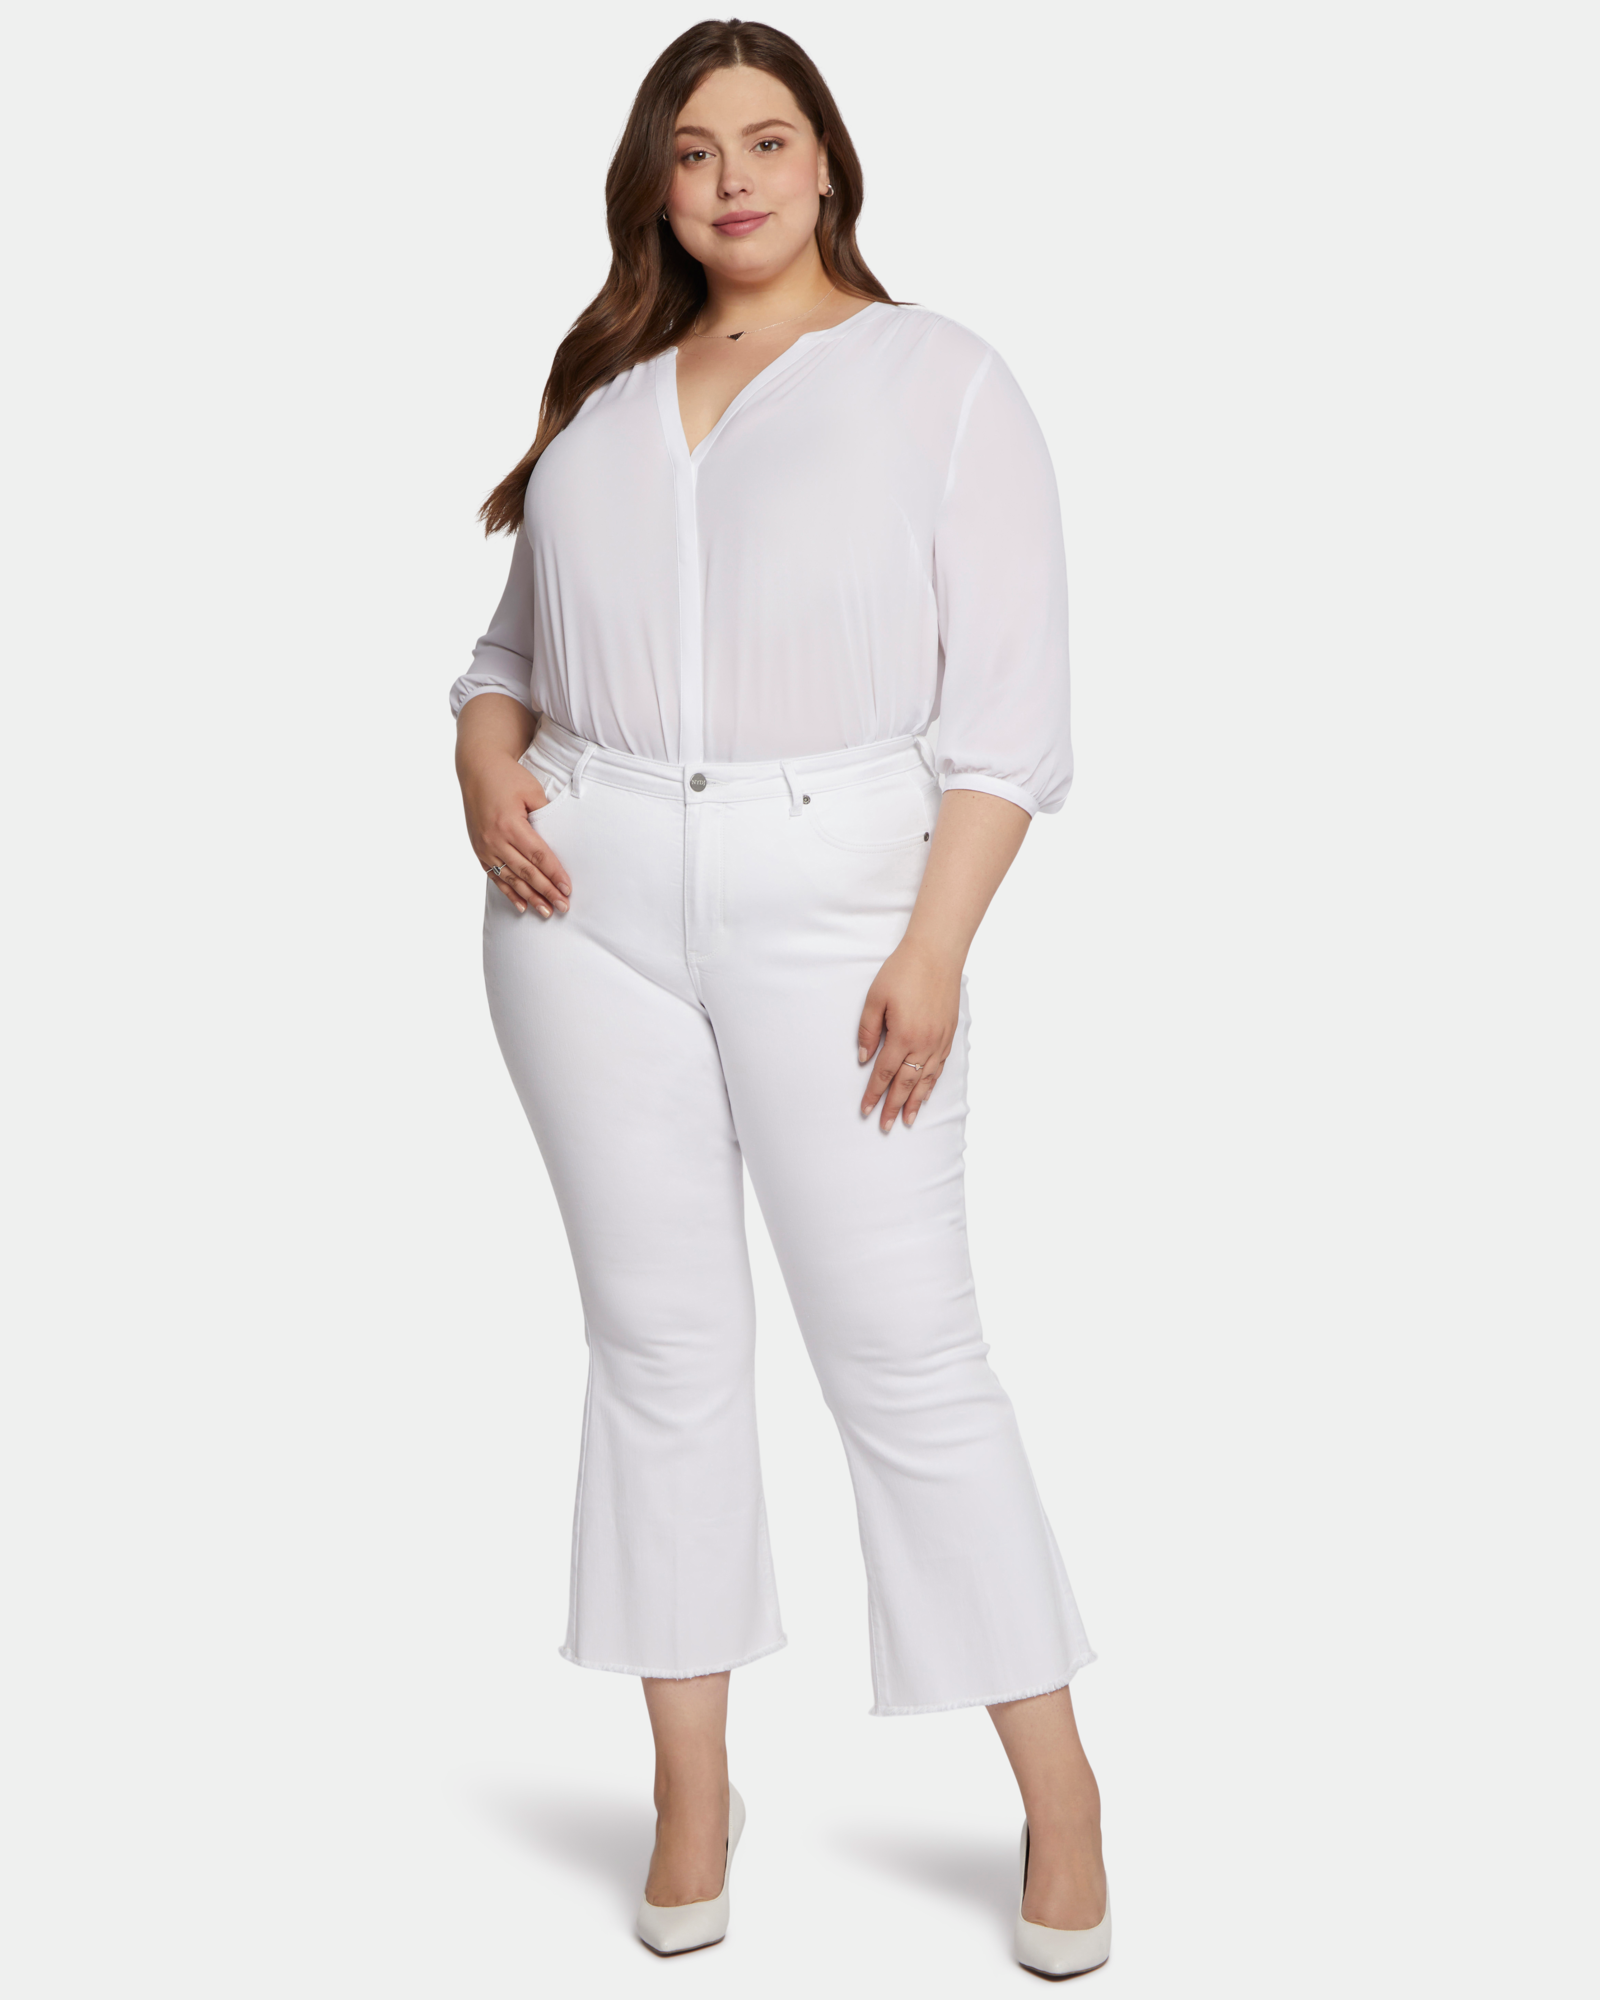 Plus Size Exclusive Modern Ankle Jeans - Meridian Wash - Curvy Fit